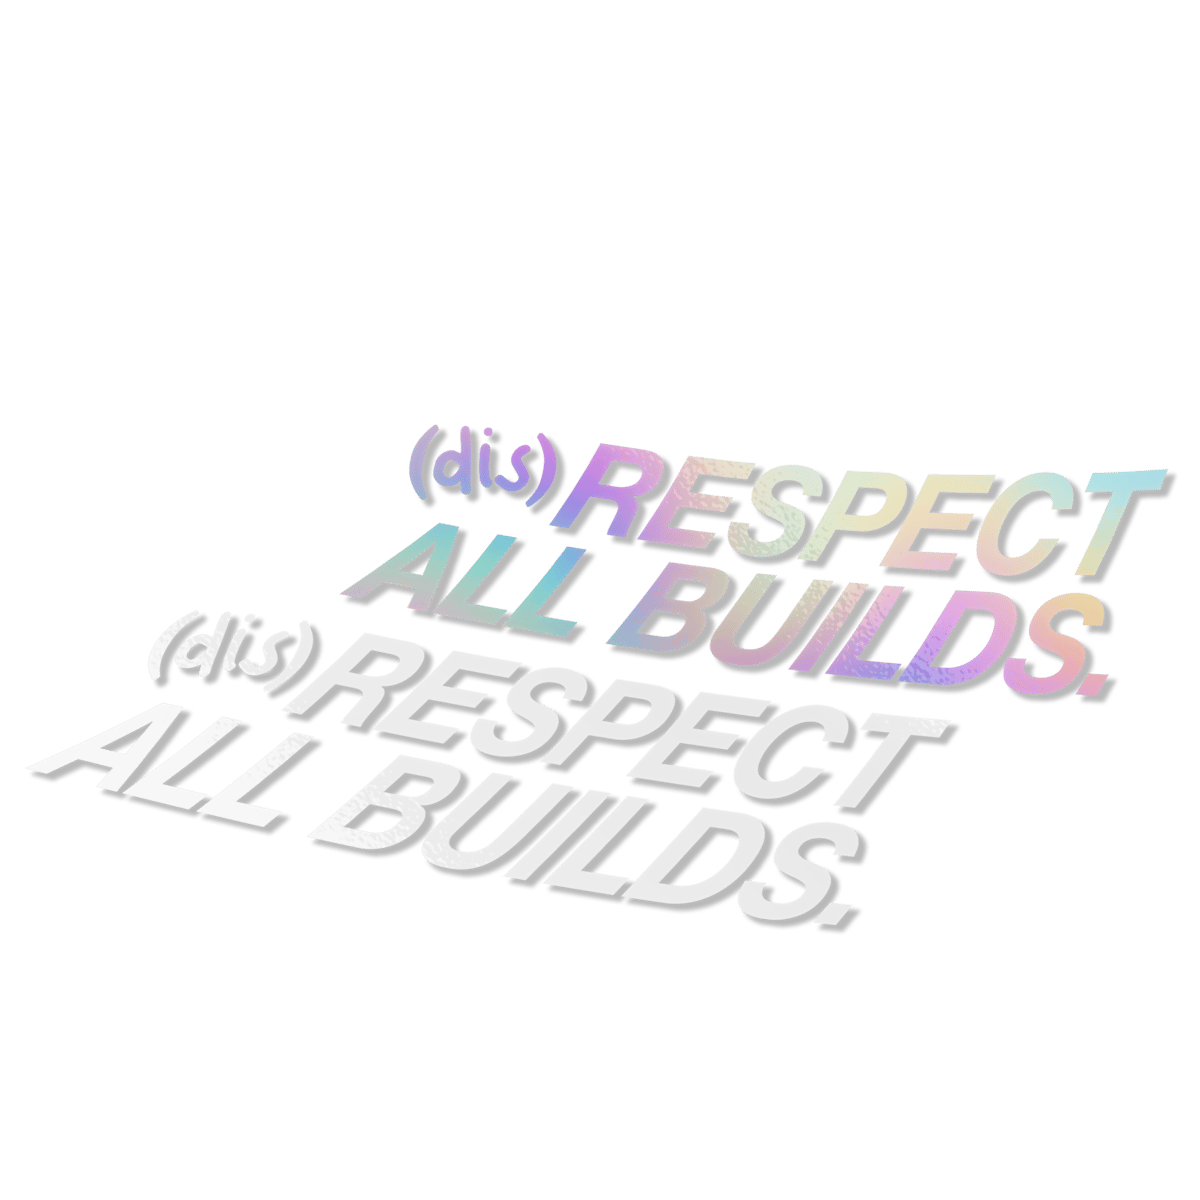 Image of DISrespect All Builds Decal